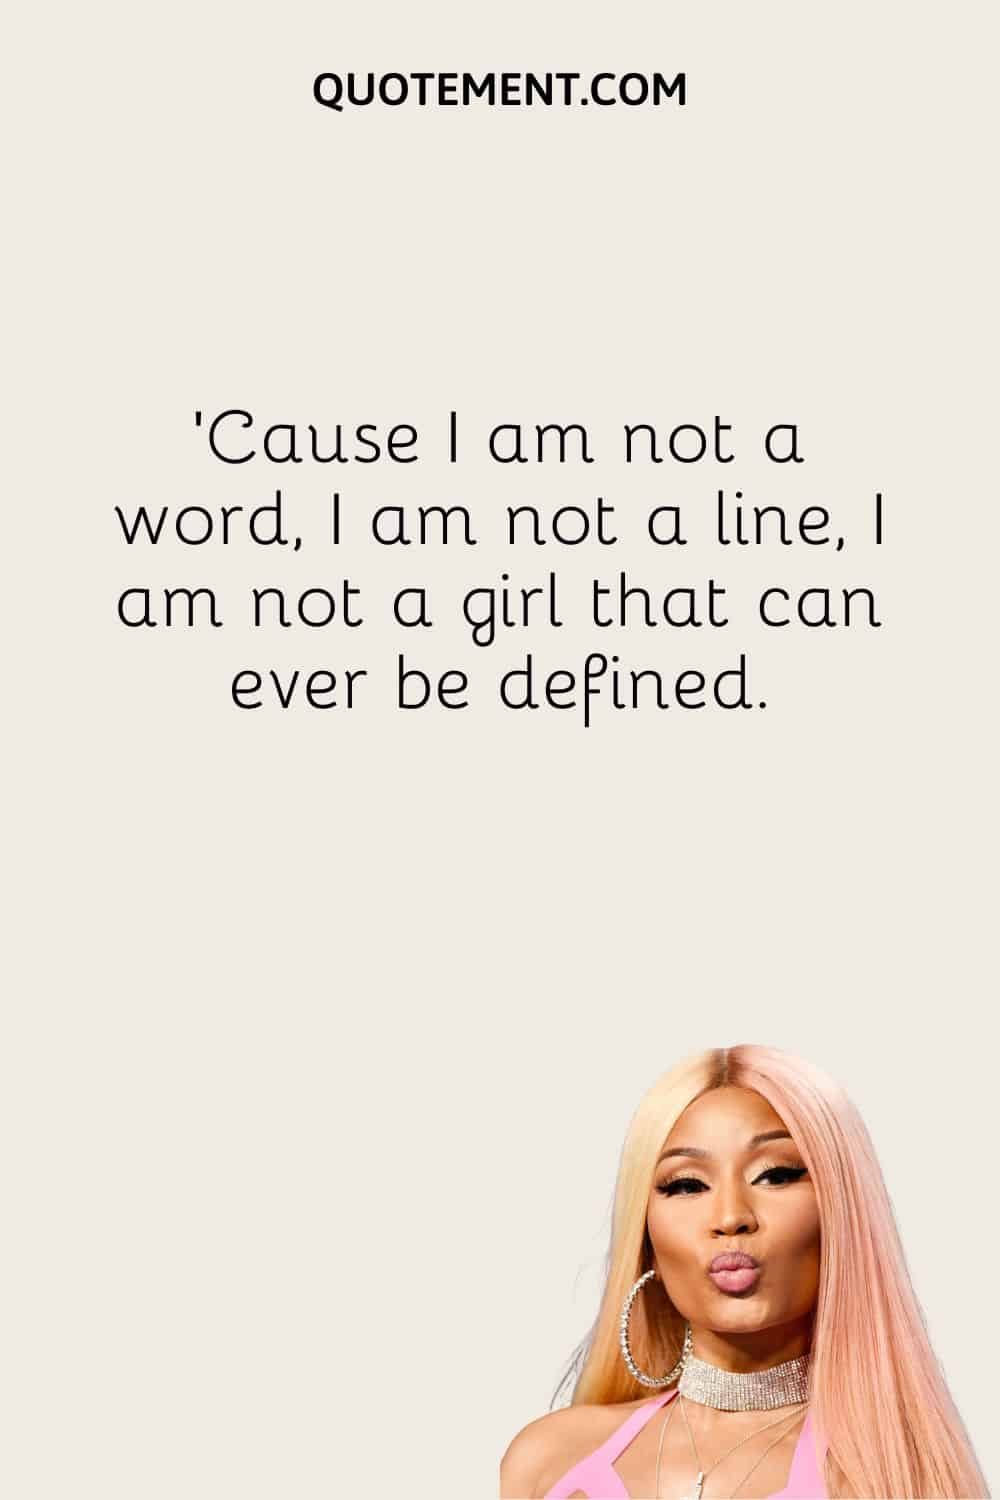 Cause I am not a word, I am not a line, I am not a girl that can ever be defined